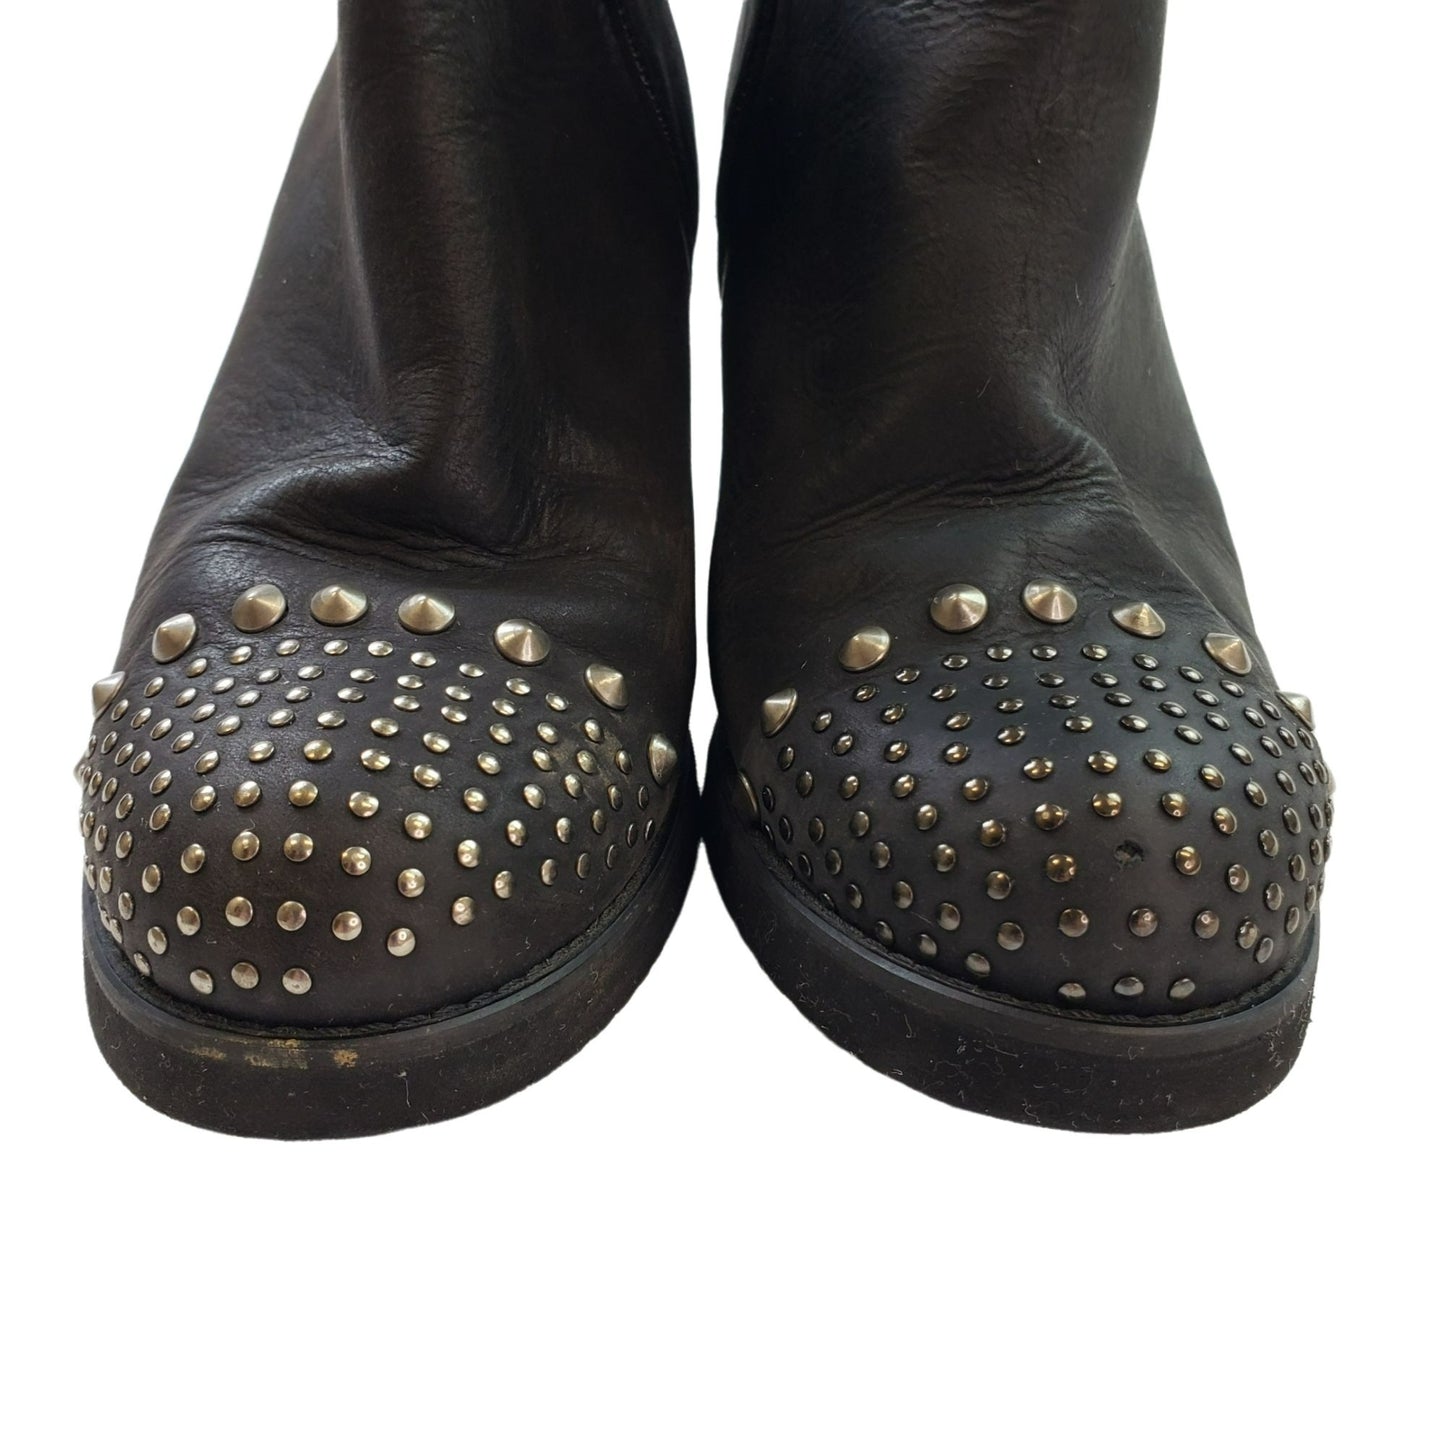 Ann Tuil Size 39 Leather Studded Ankle Boots